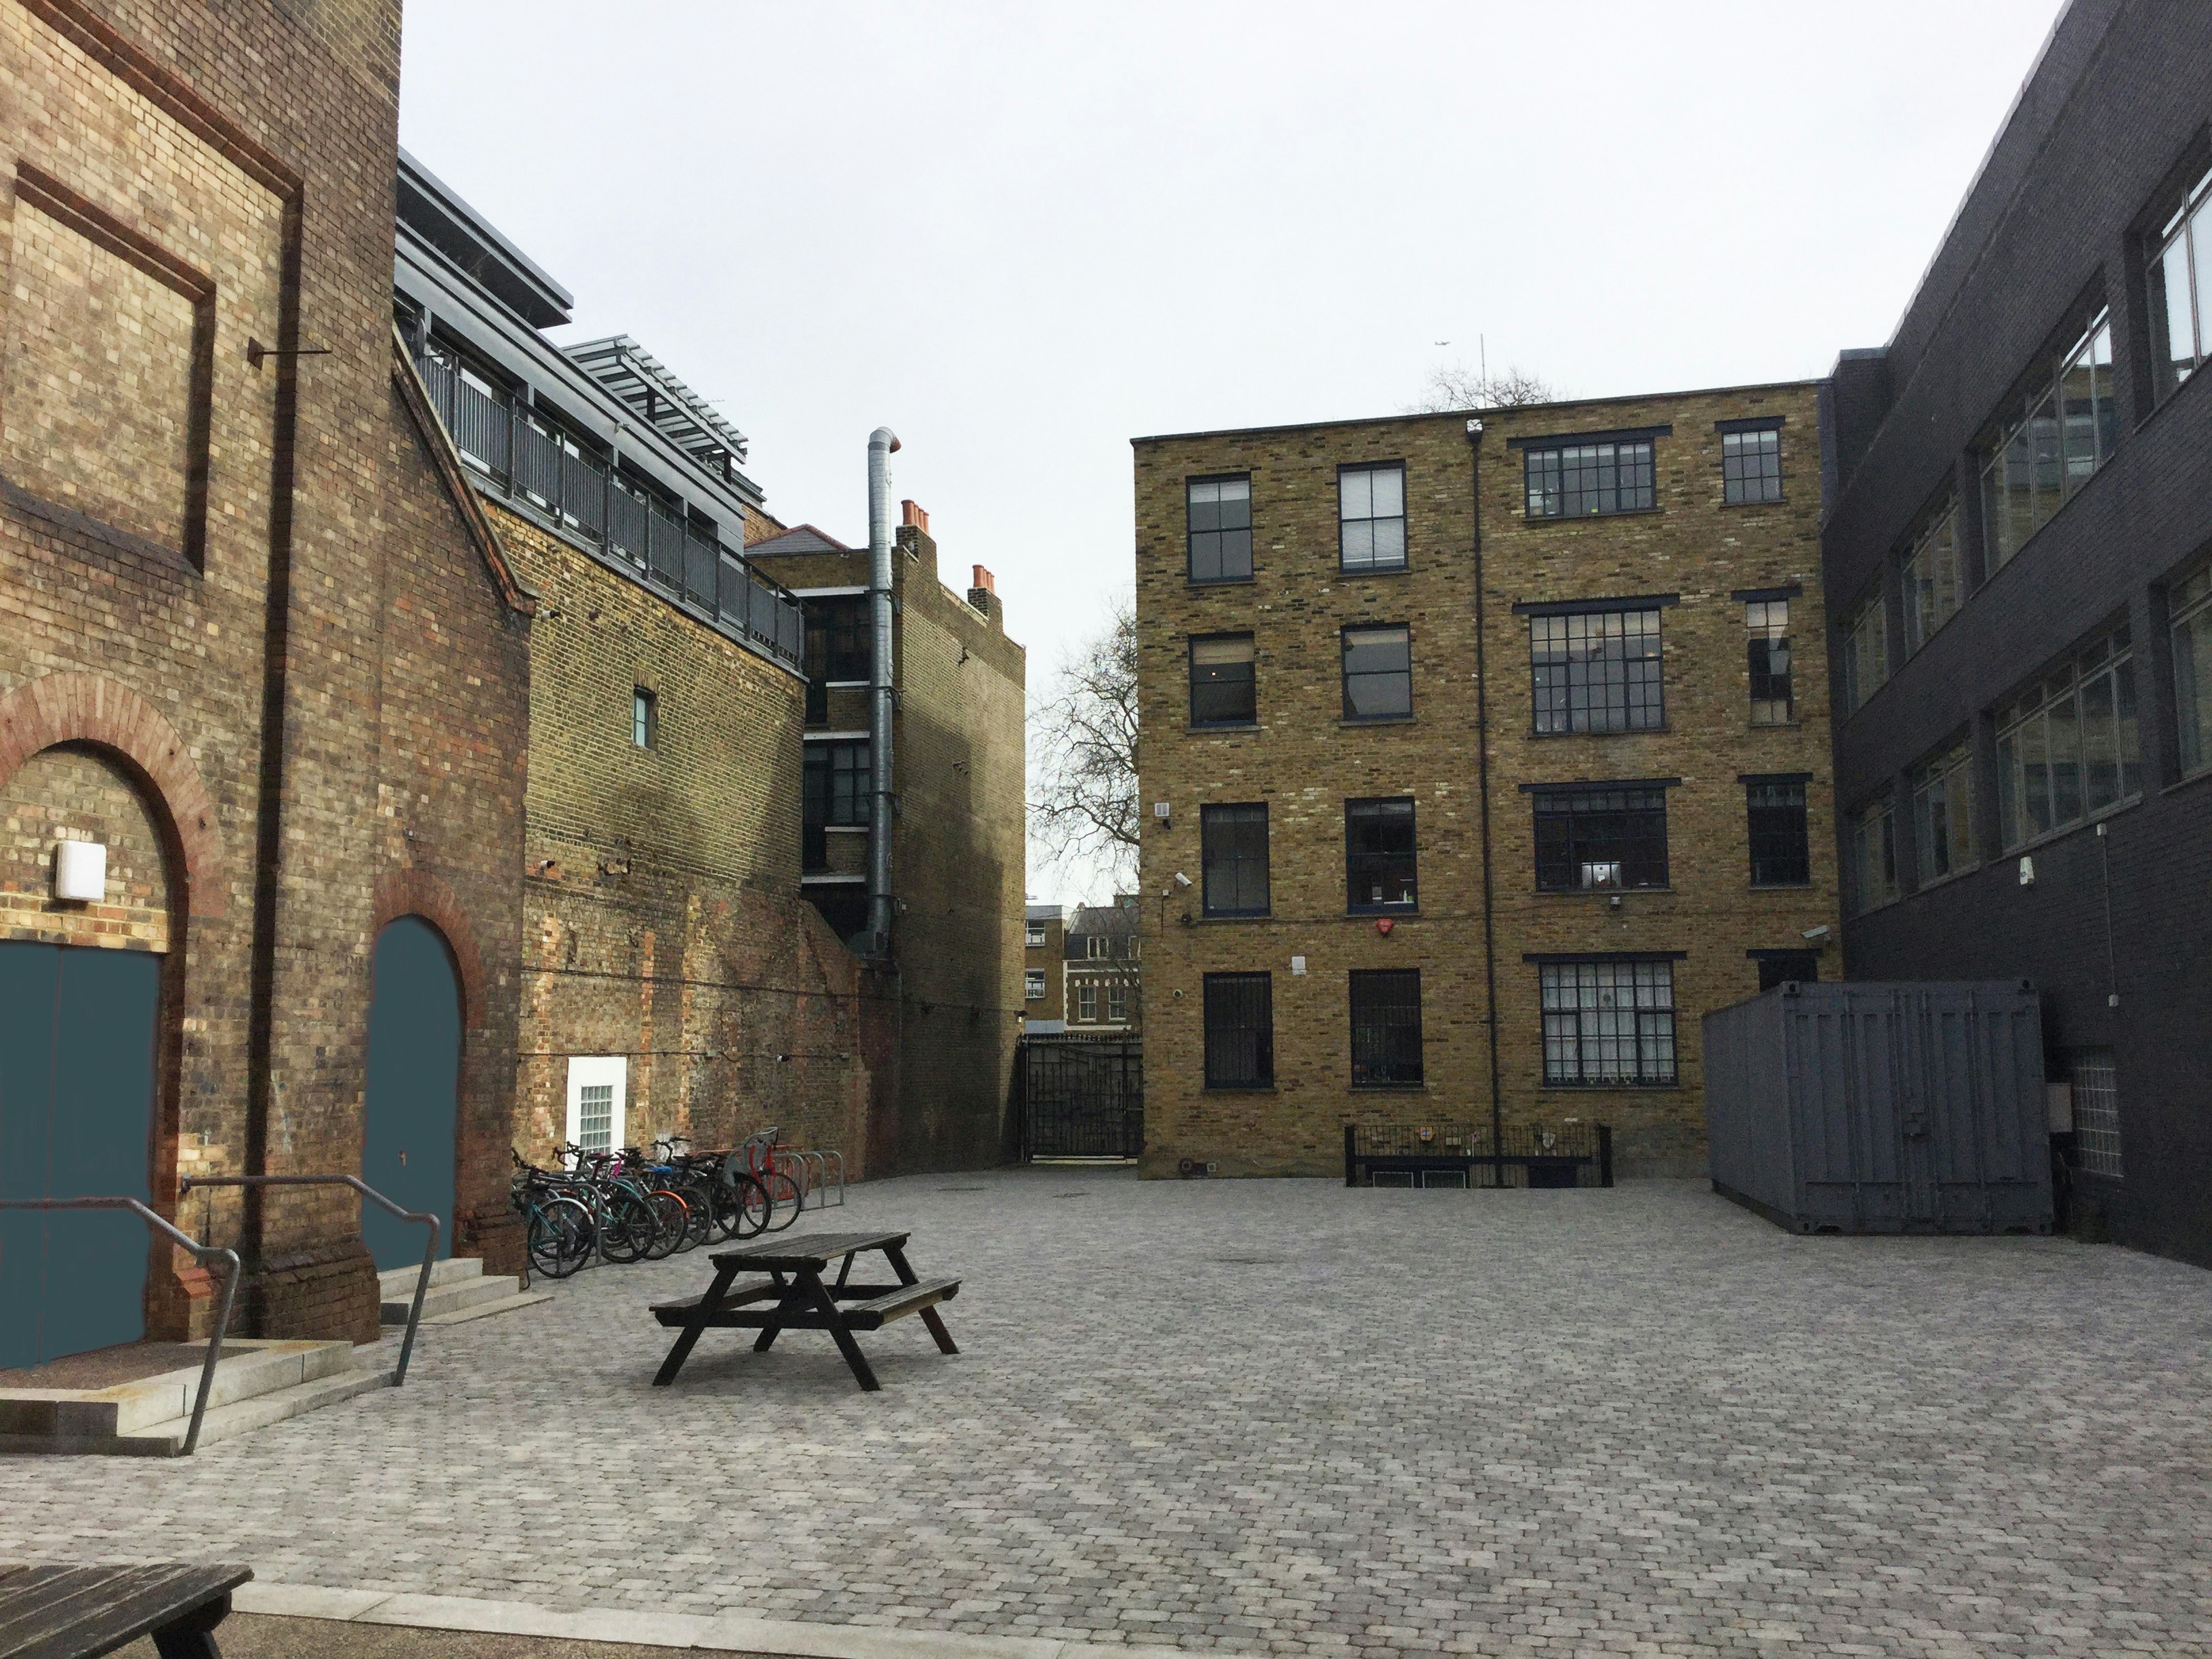 Shoreditch Electric Light Station - Courtyard image 2